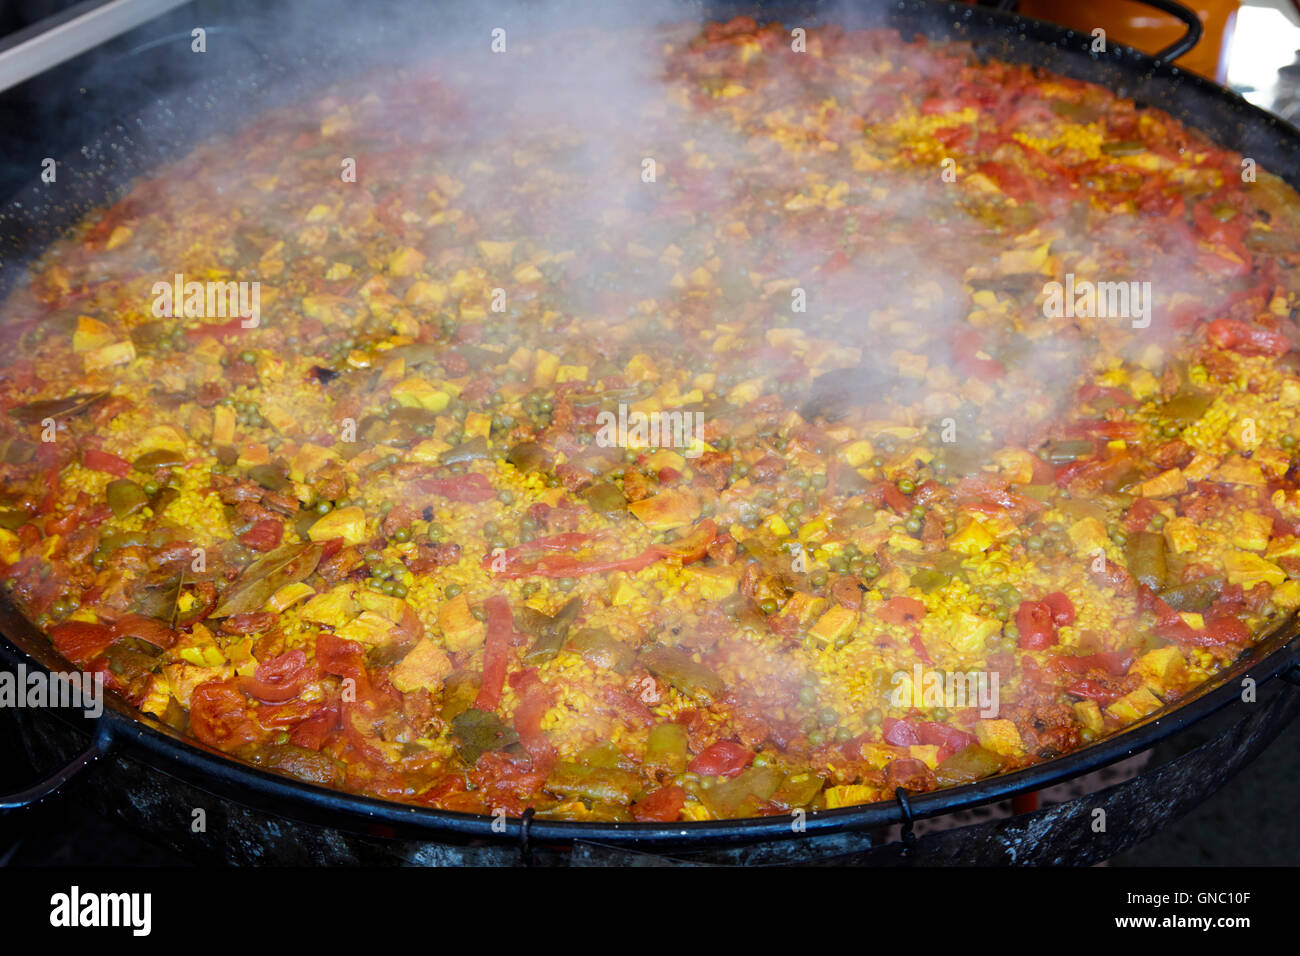 https://c8.alamy.com/comp/GNC10F/large-pan-of-paella-cooking-on-a-commercial-pan-at-a-food-festival-GNC10F.jpg